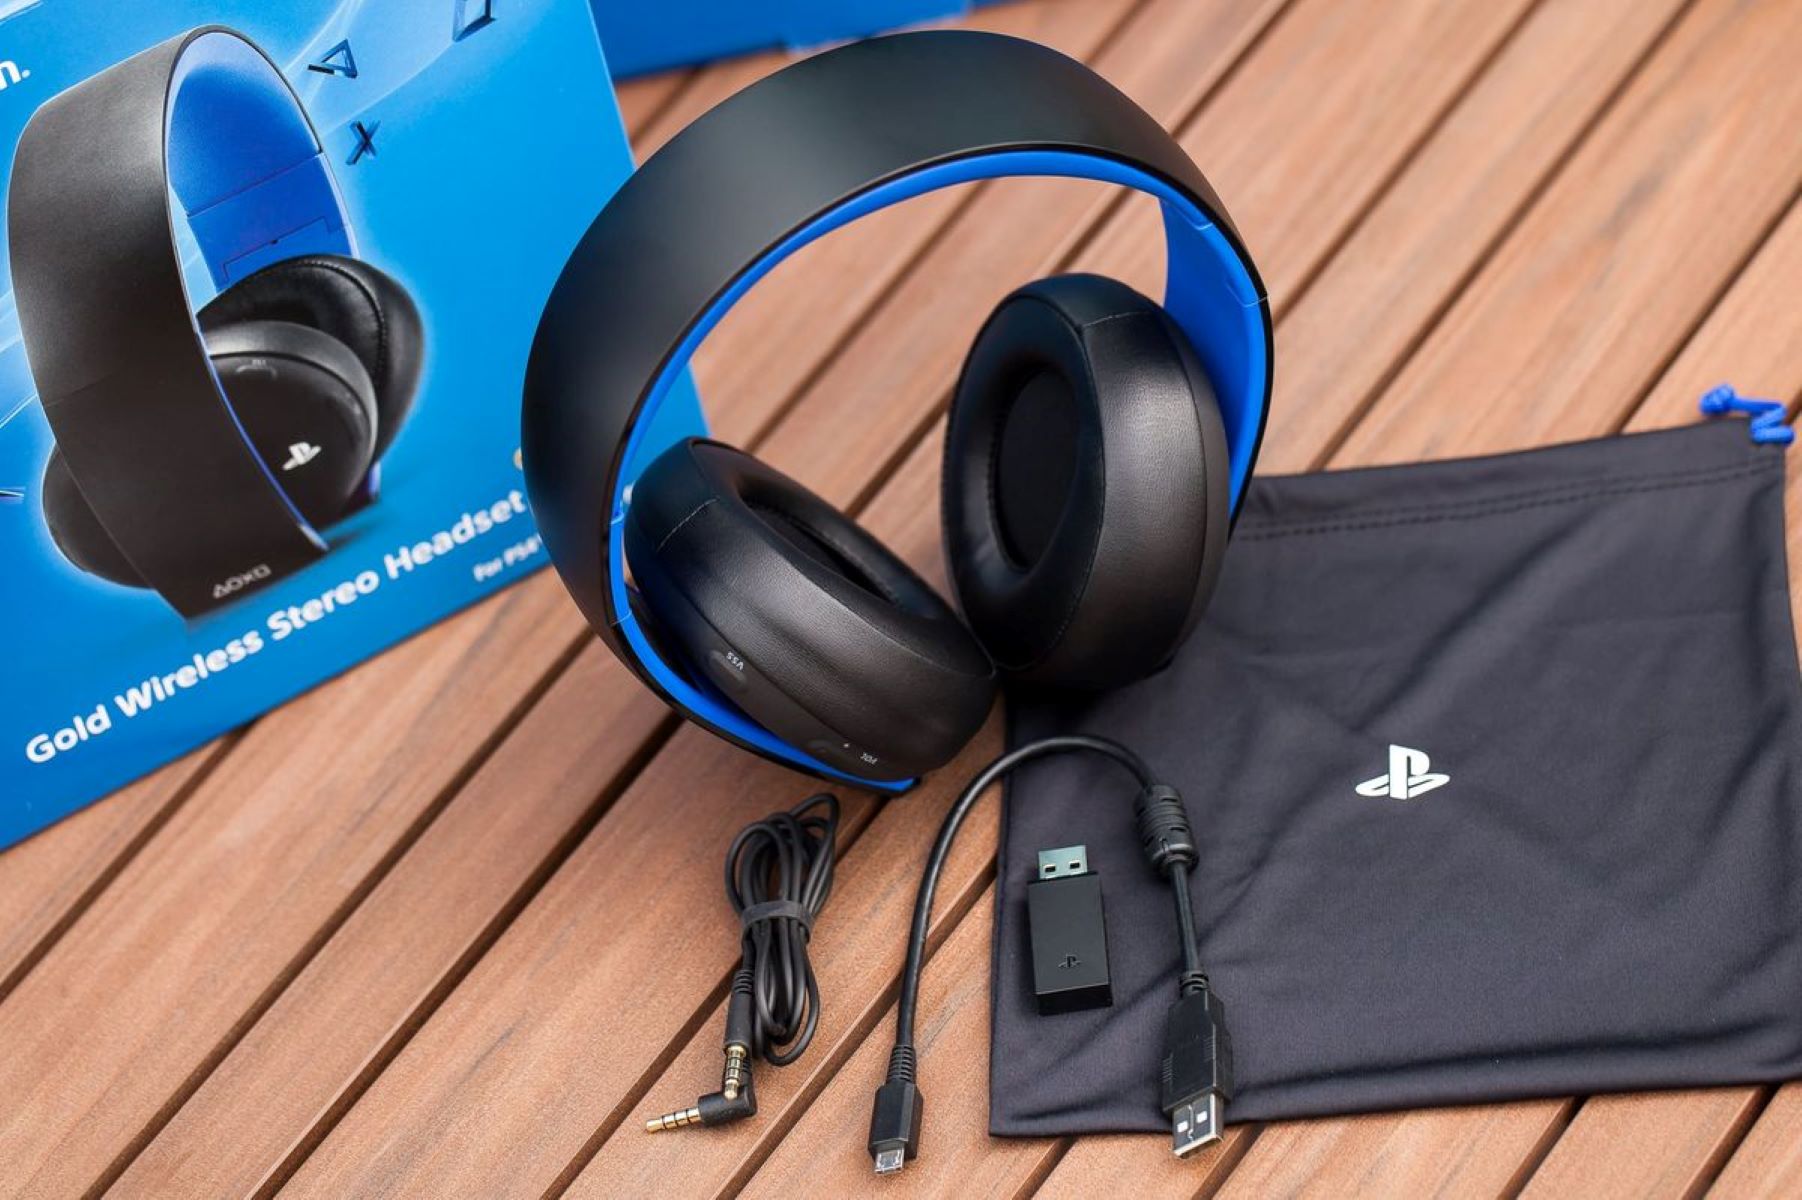 Setting Up PlayStation Gold Headset For PC Use